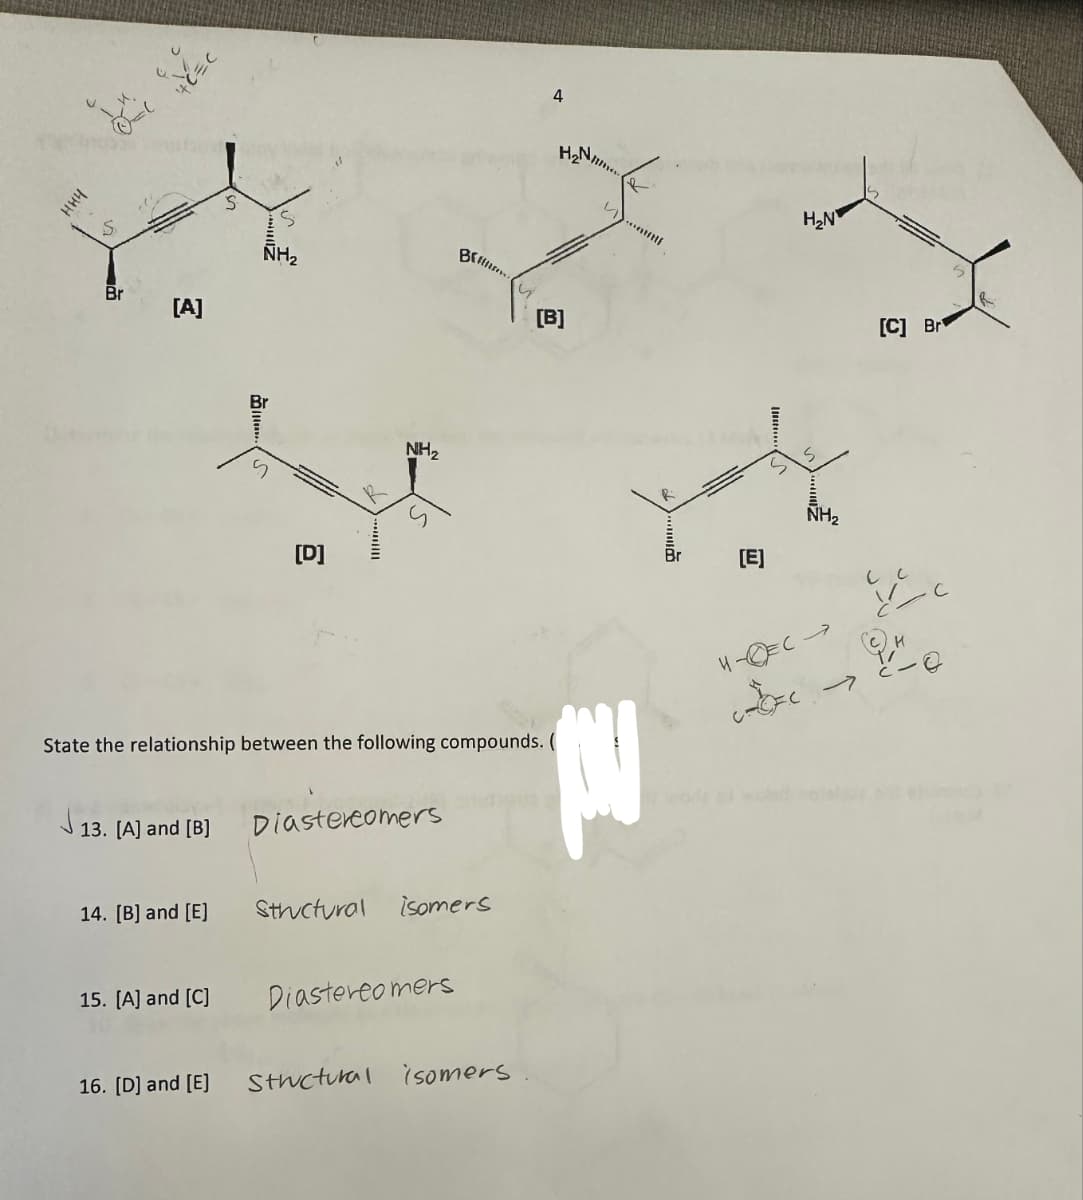 нич
S
Brin
NH₂
Br
[A]
า
NH₂
[D]
4
H
Matftli
Sp
[B]
State the relationship between the following compounds. (
13. [A] and [B]
Diastereomers
14. [B] and [E]
Structural isomers
15. [A] and [C]
Diastereomers
16. [D] and [E]
Structural isomers
R
H₂N
[E]
ら
S
NH₂
H-C-
7
[C] Br
C
→
Le
R